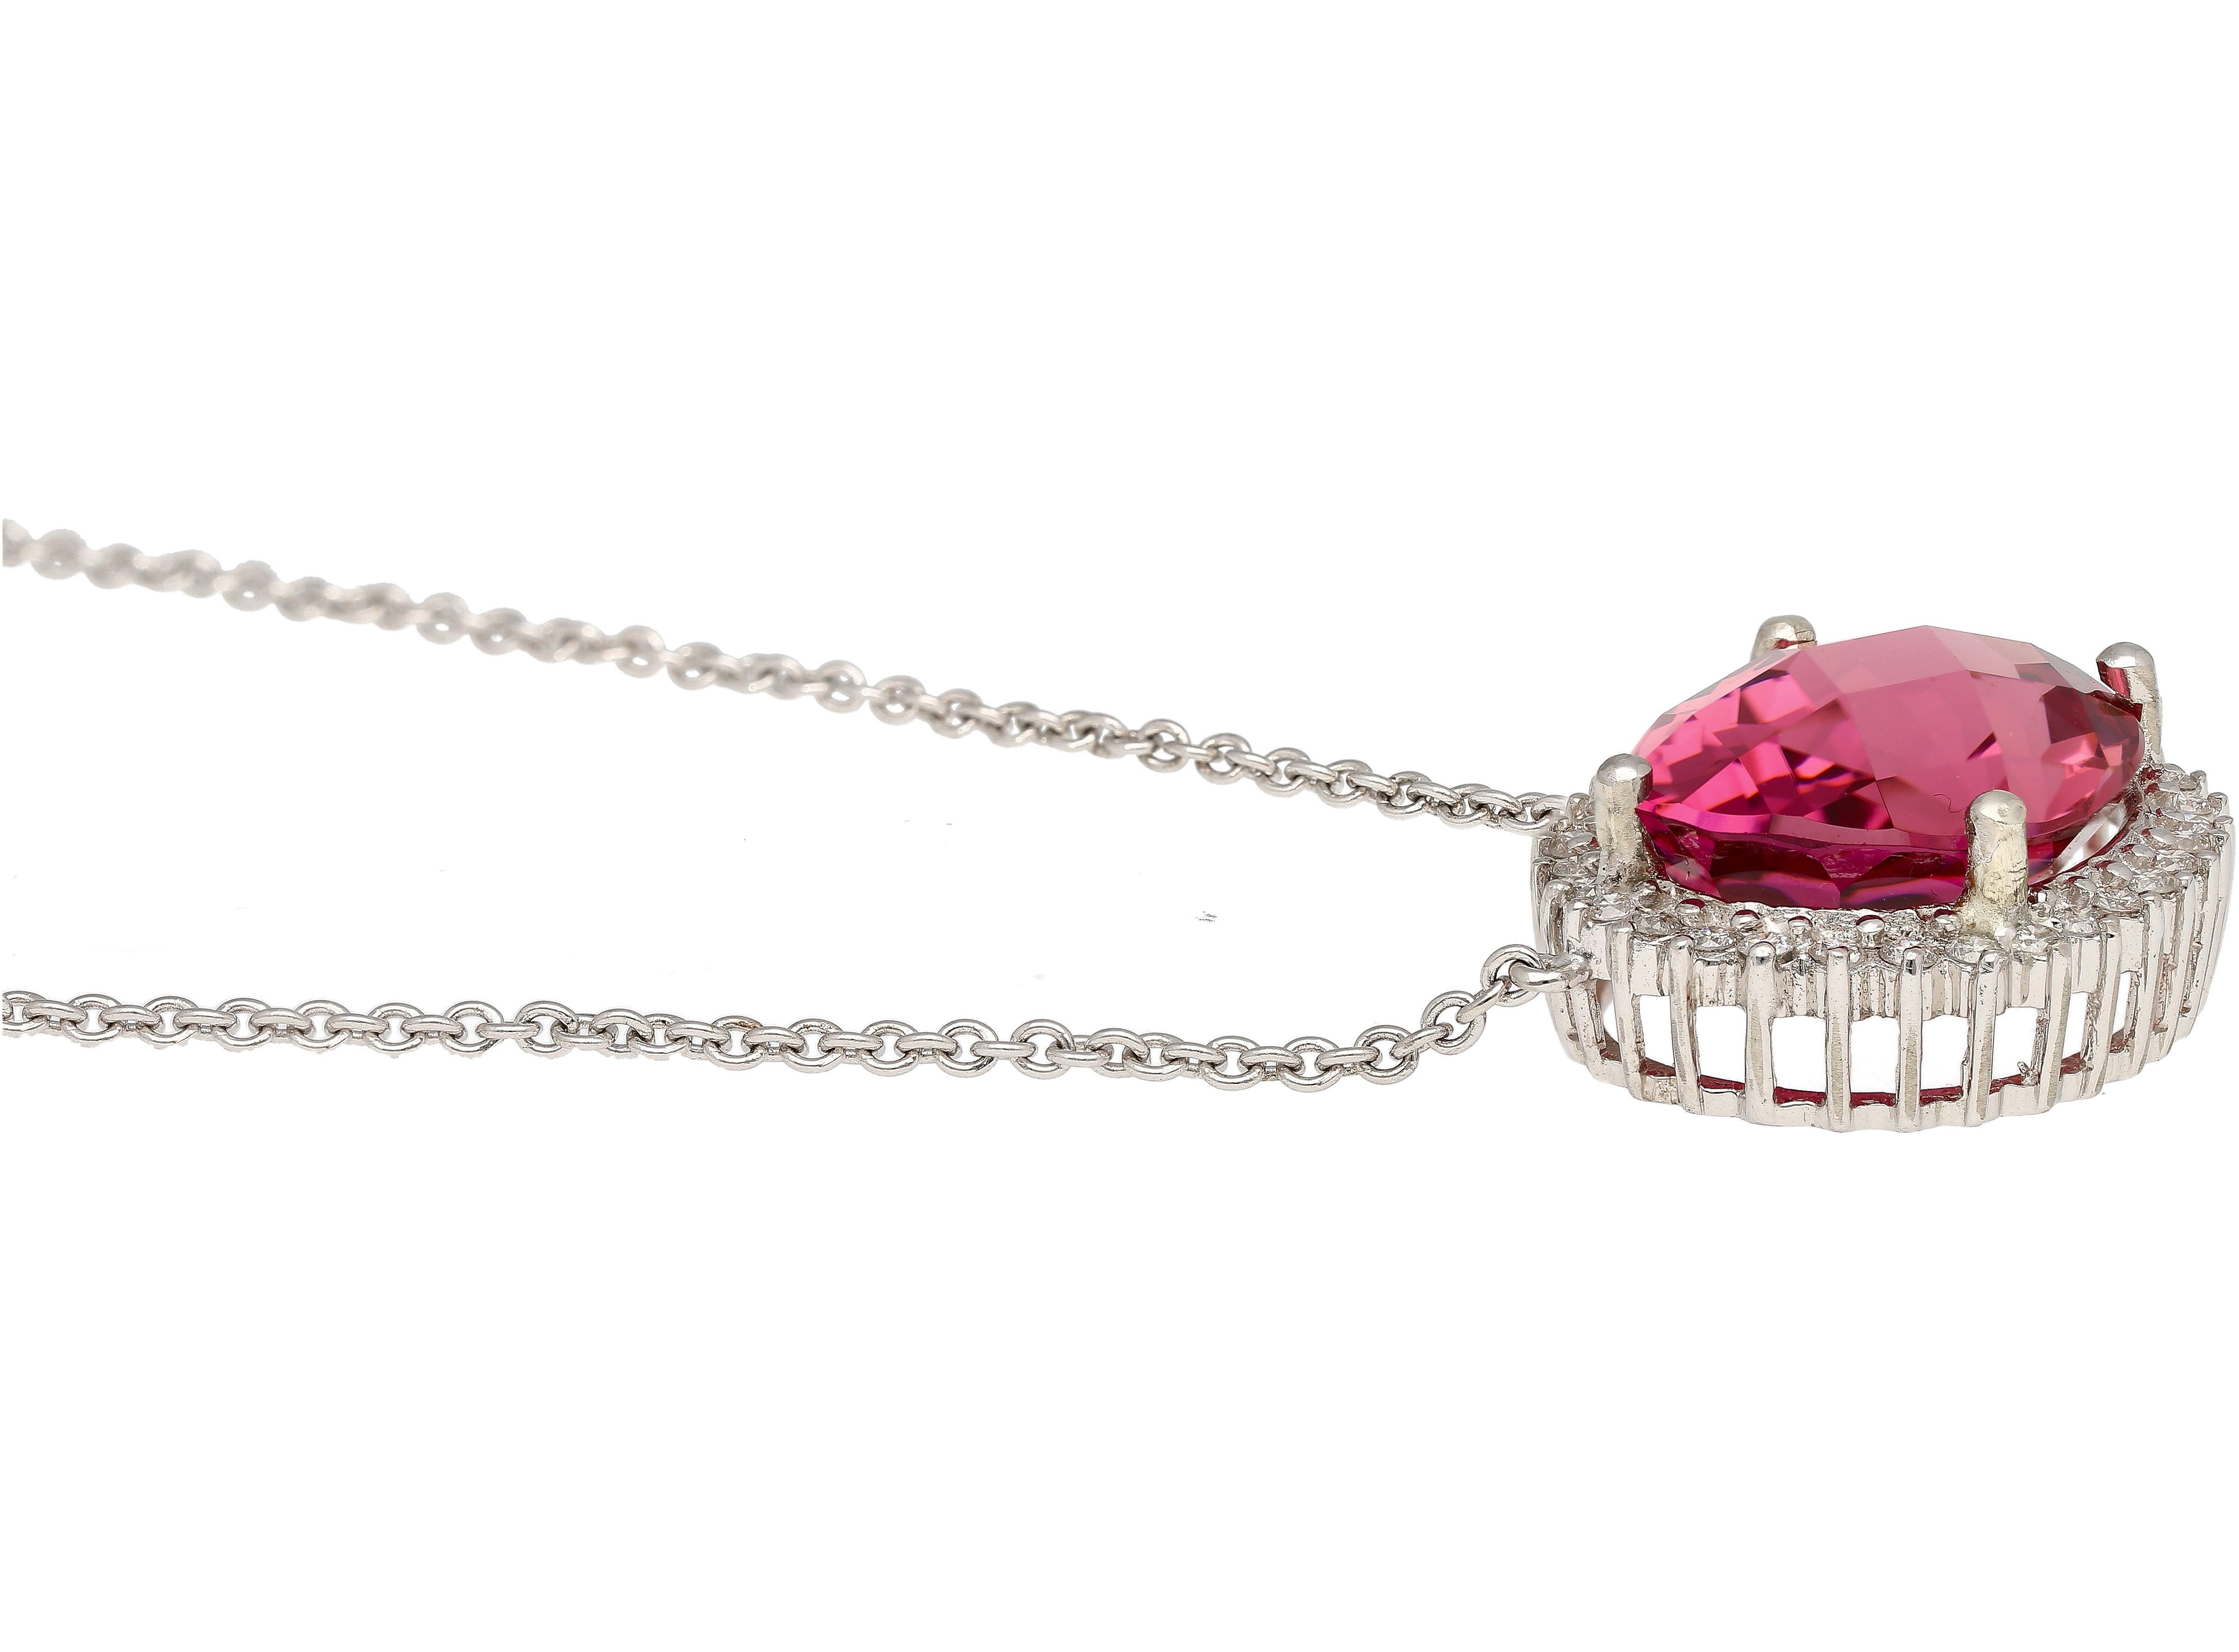 Oval Cut 21.13 Carat Pink Tourmaline & Diamond Floating Pendant Necklace in 14K/18K Gold For Sale